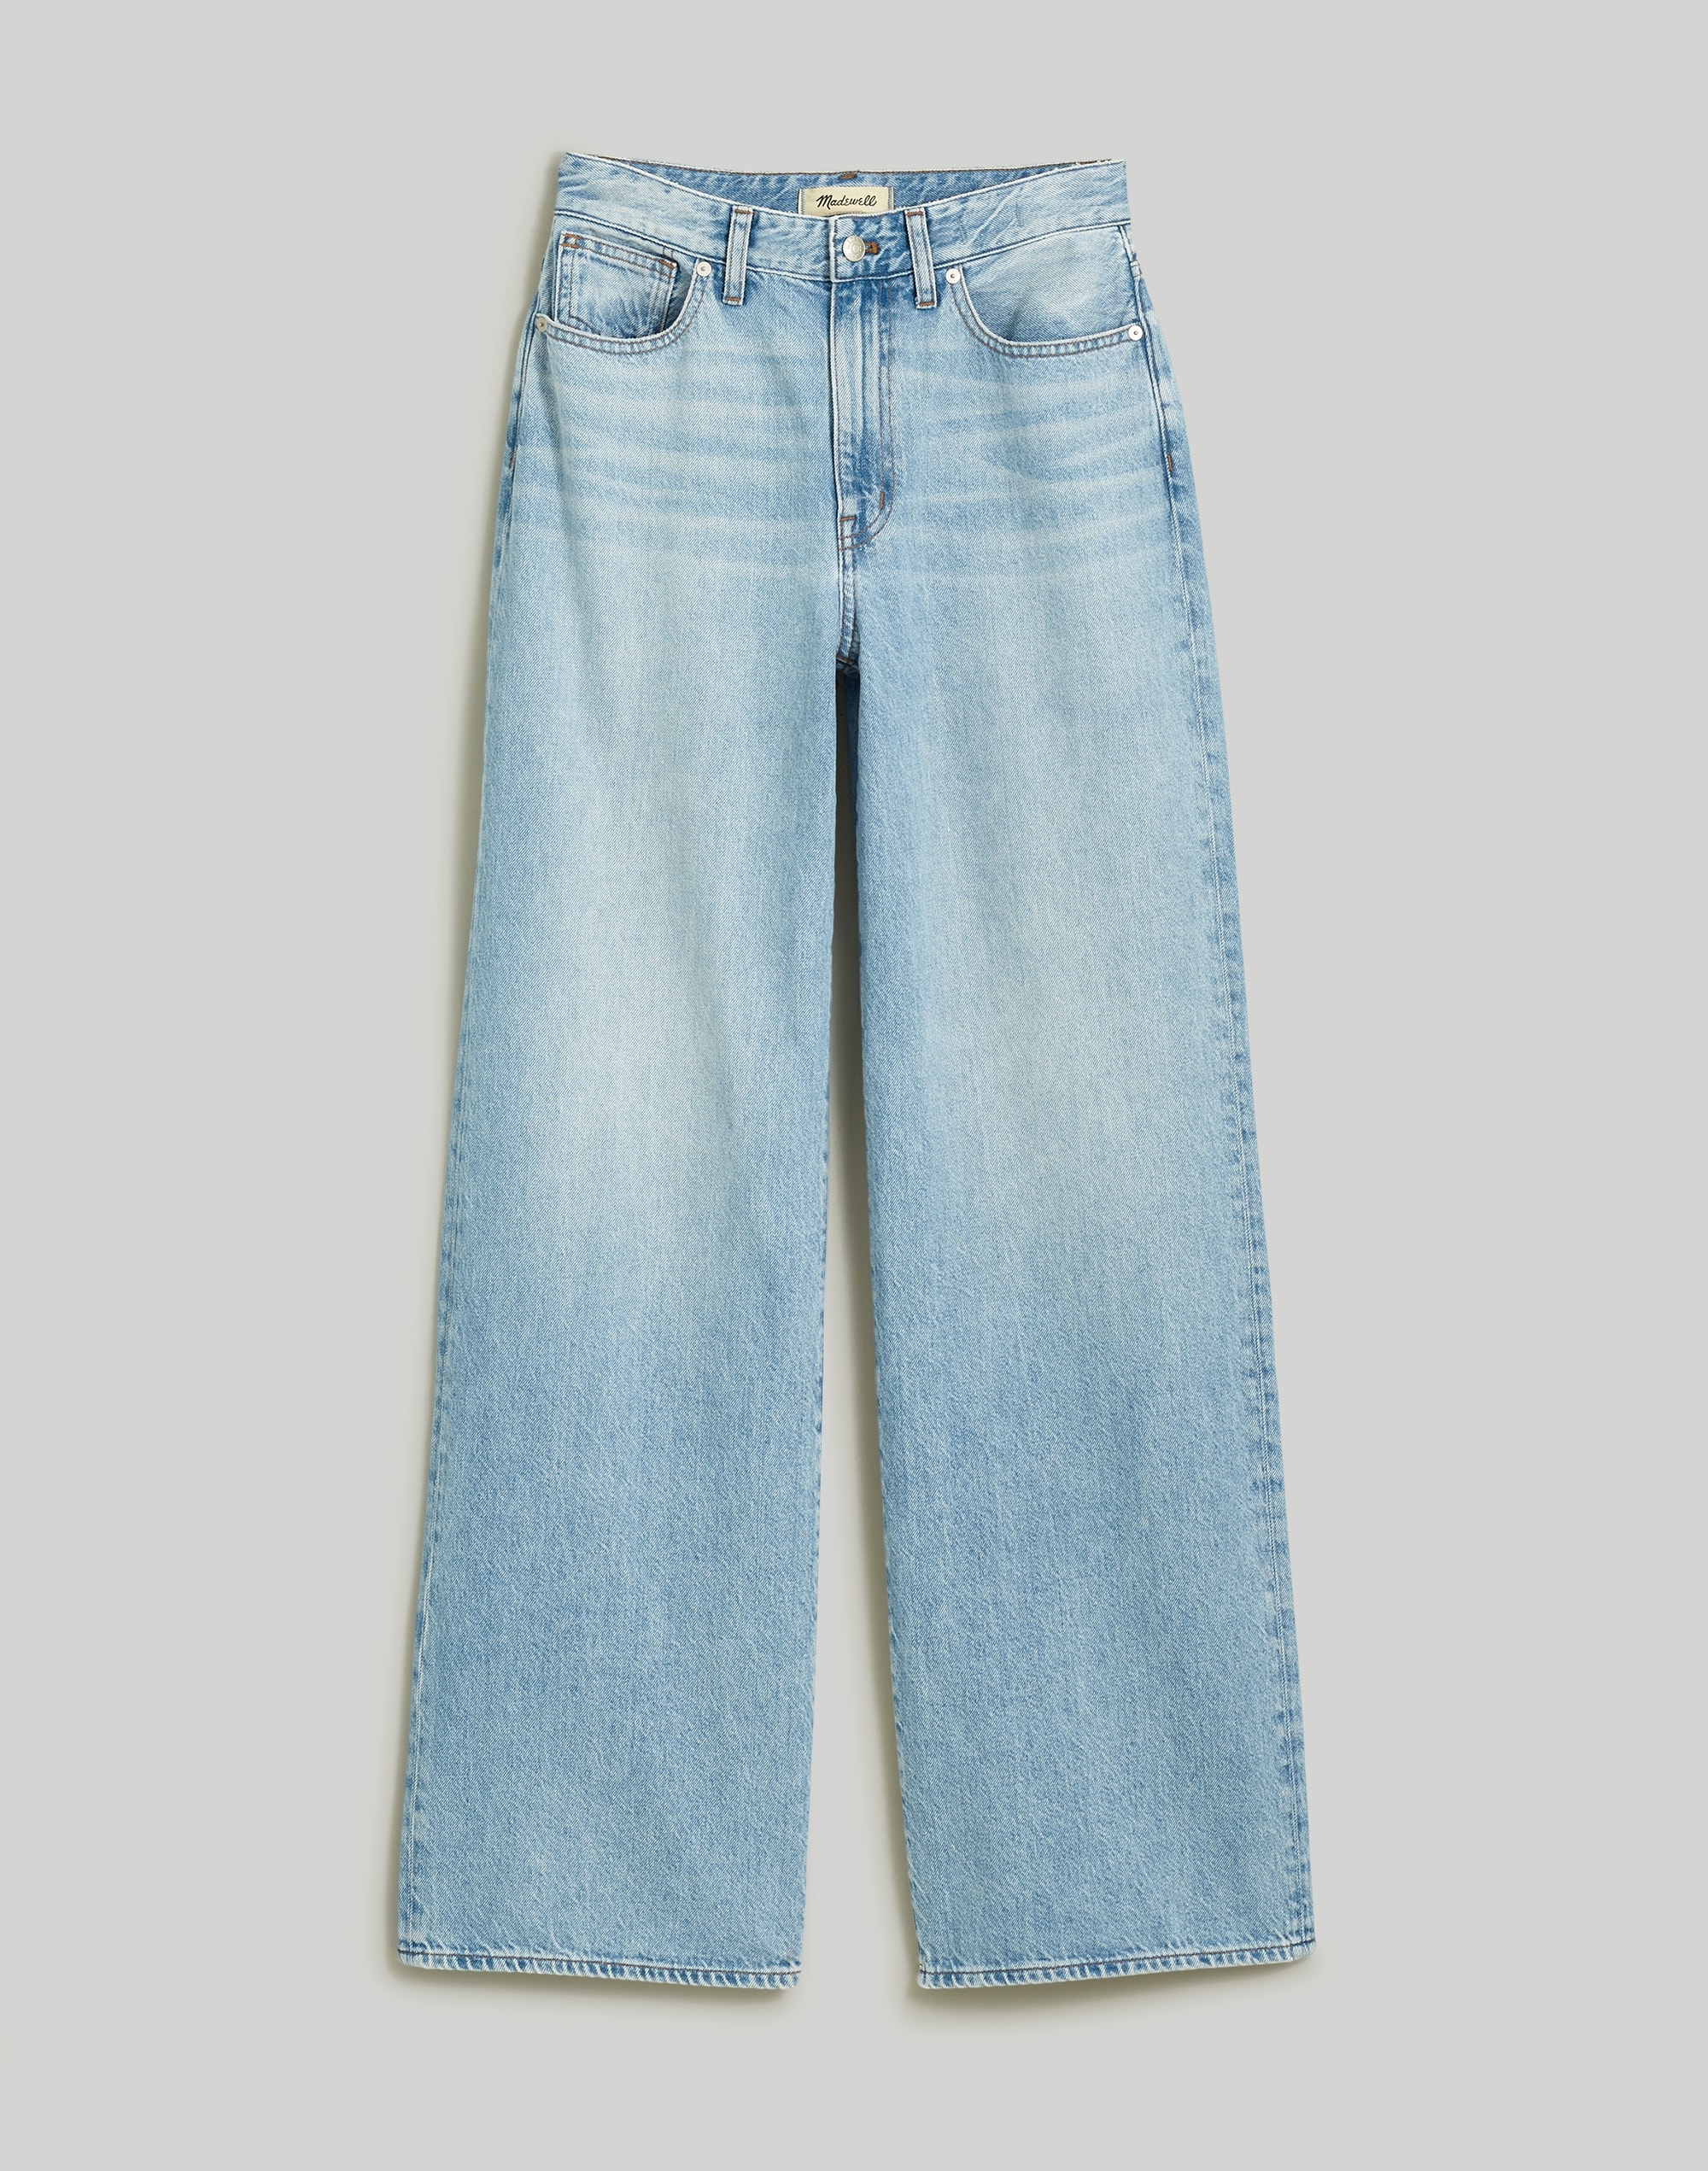 Superwide-Leg Jeans in Ahern Wash: Airy Denim Edition | Madewell